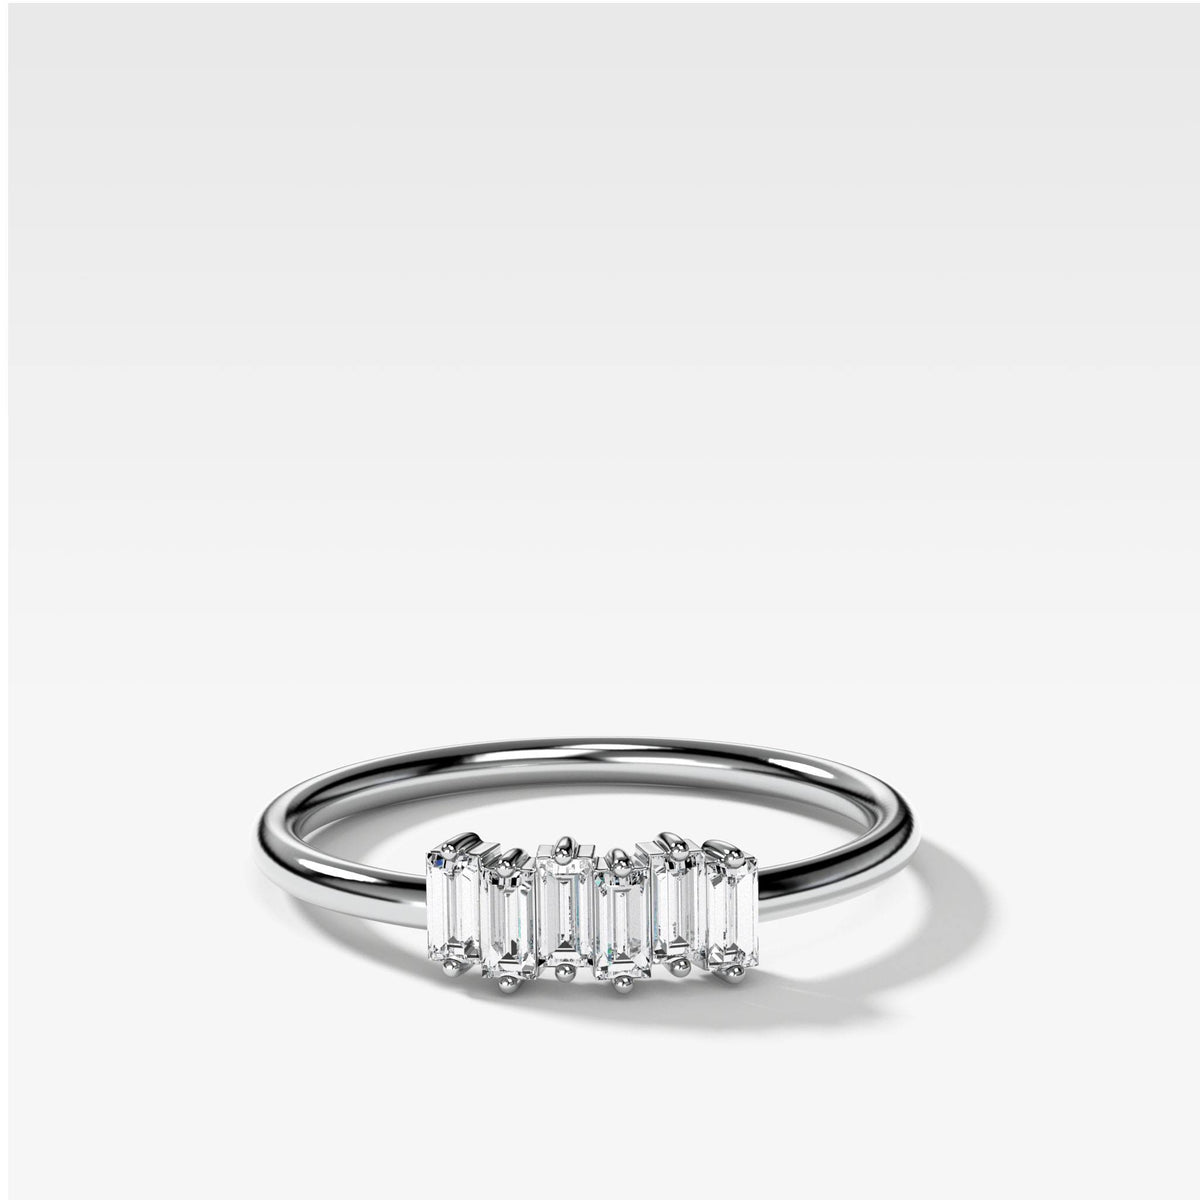 Petite Baguette Stacker Band available by Good Stone in White Gold